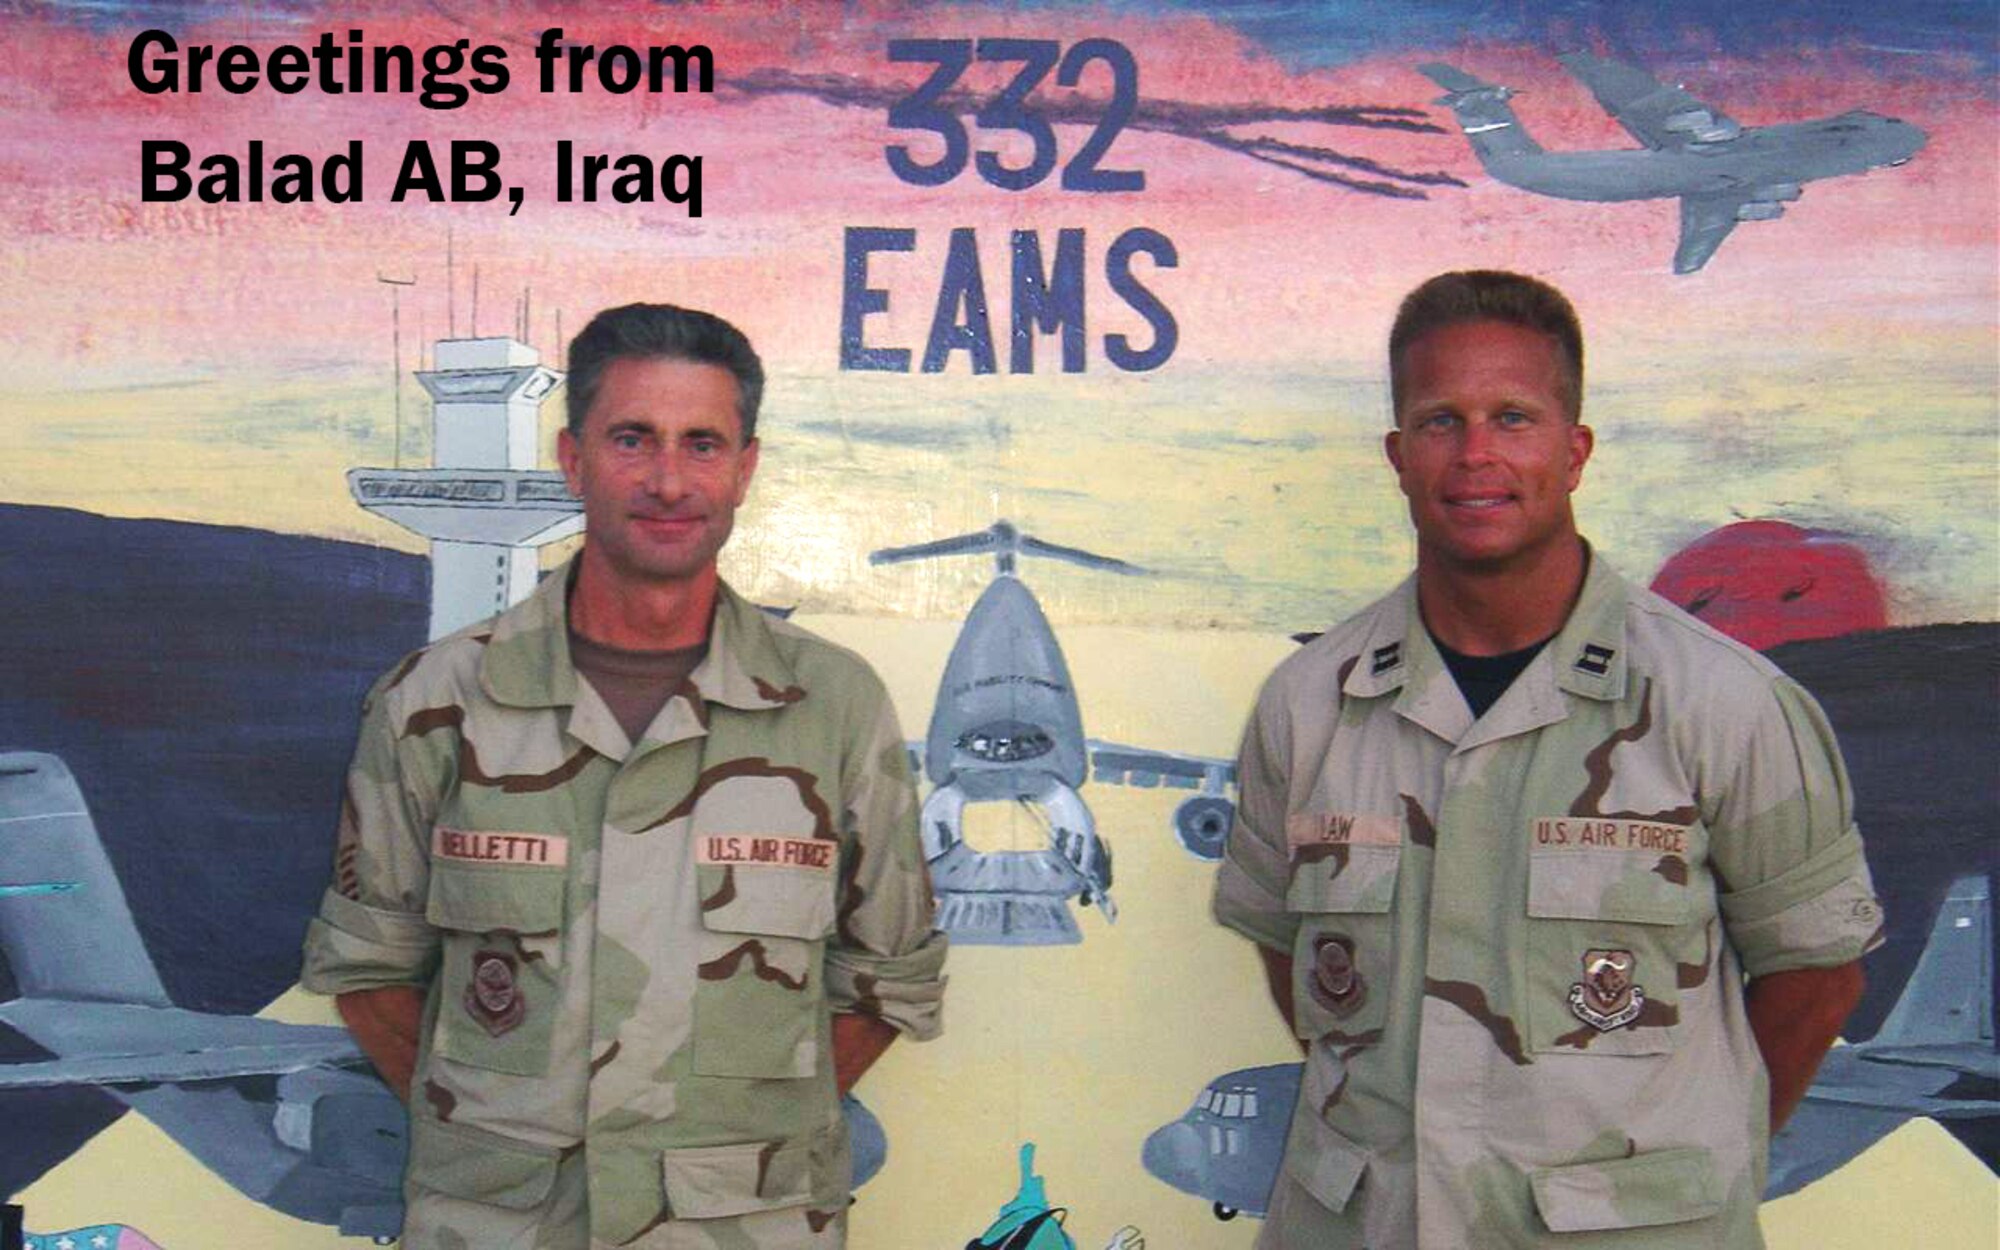 Chief Master Sgt. Robert Belletti and Maj. Roger Law pose for a picture postcard-type photo in Balad AB, Iraq. Both Reservists earned the Bronze Star for their service in Iraq.
(U.S. Air Force photo)